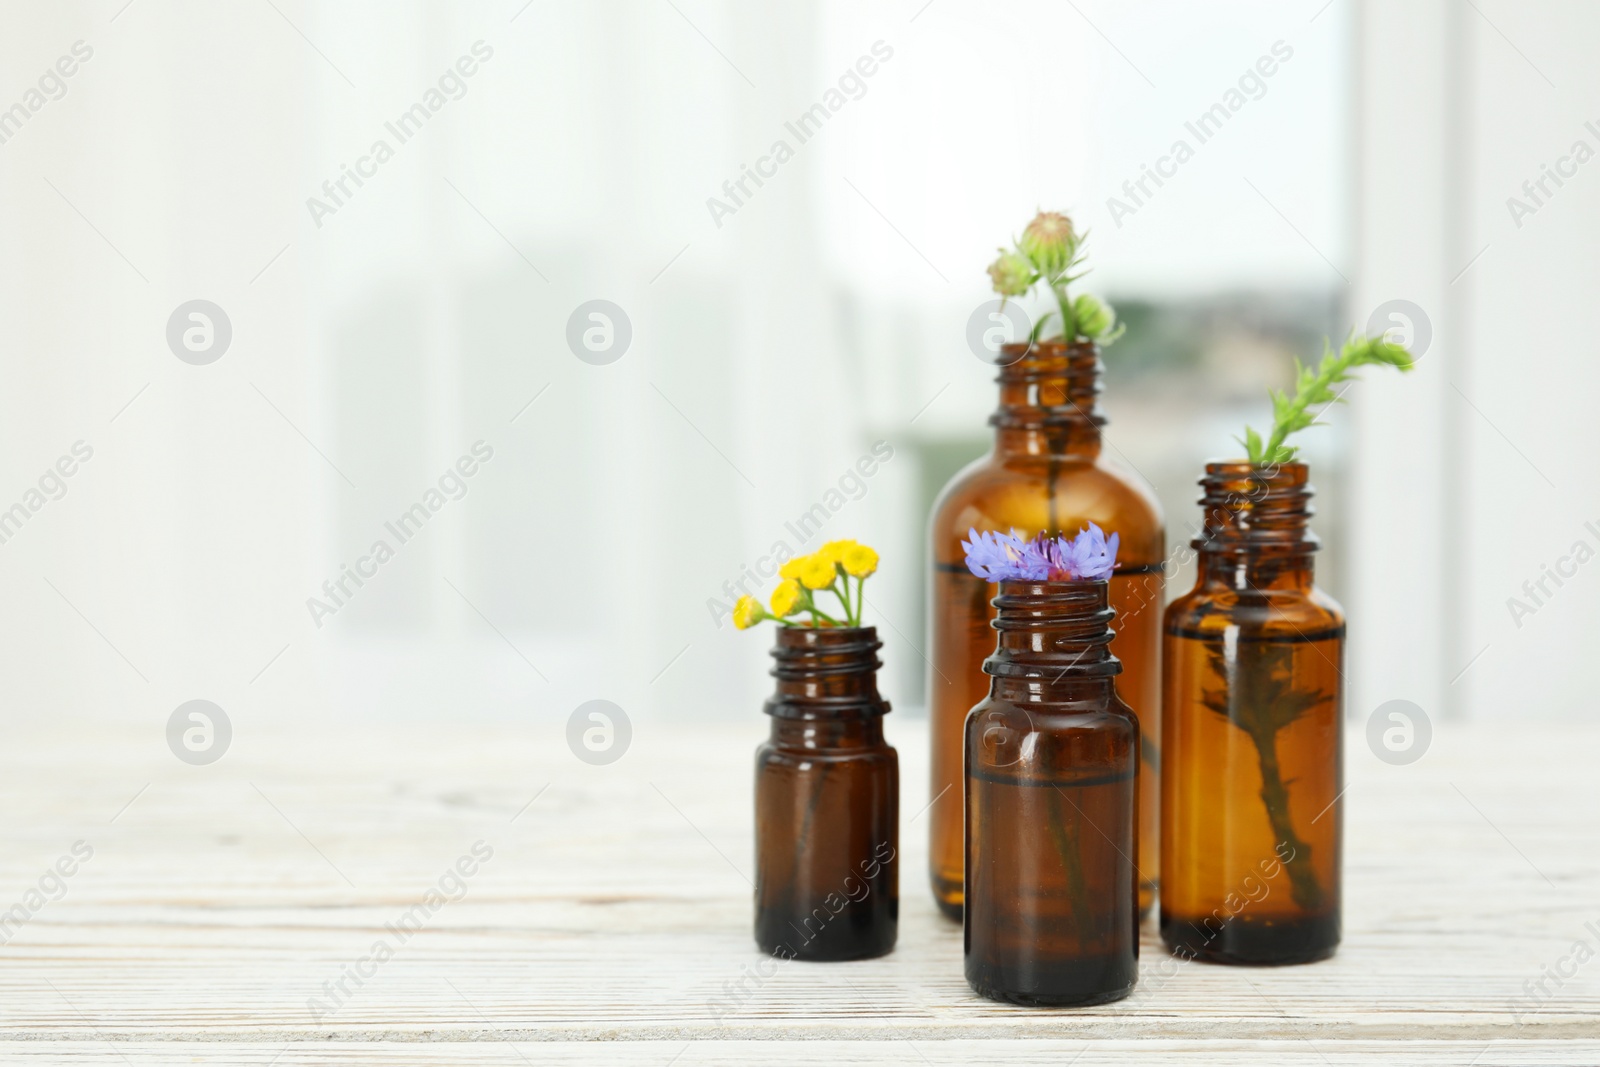 Photo of Composition with essential oils and flowers on table